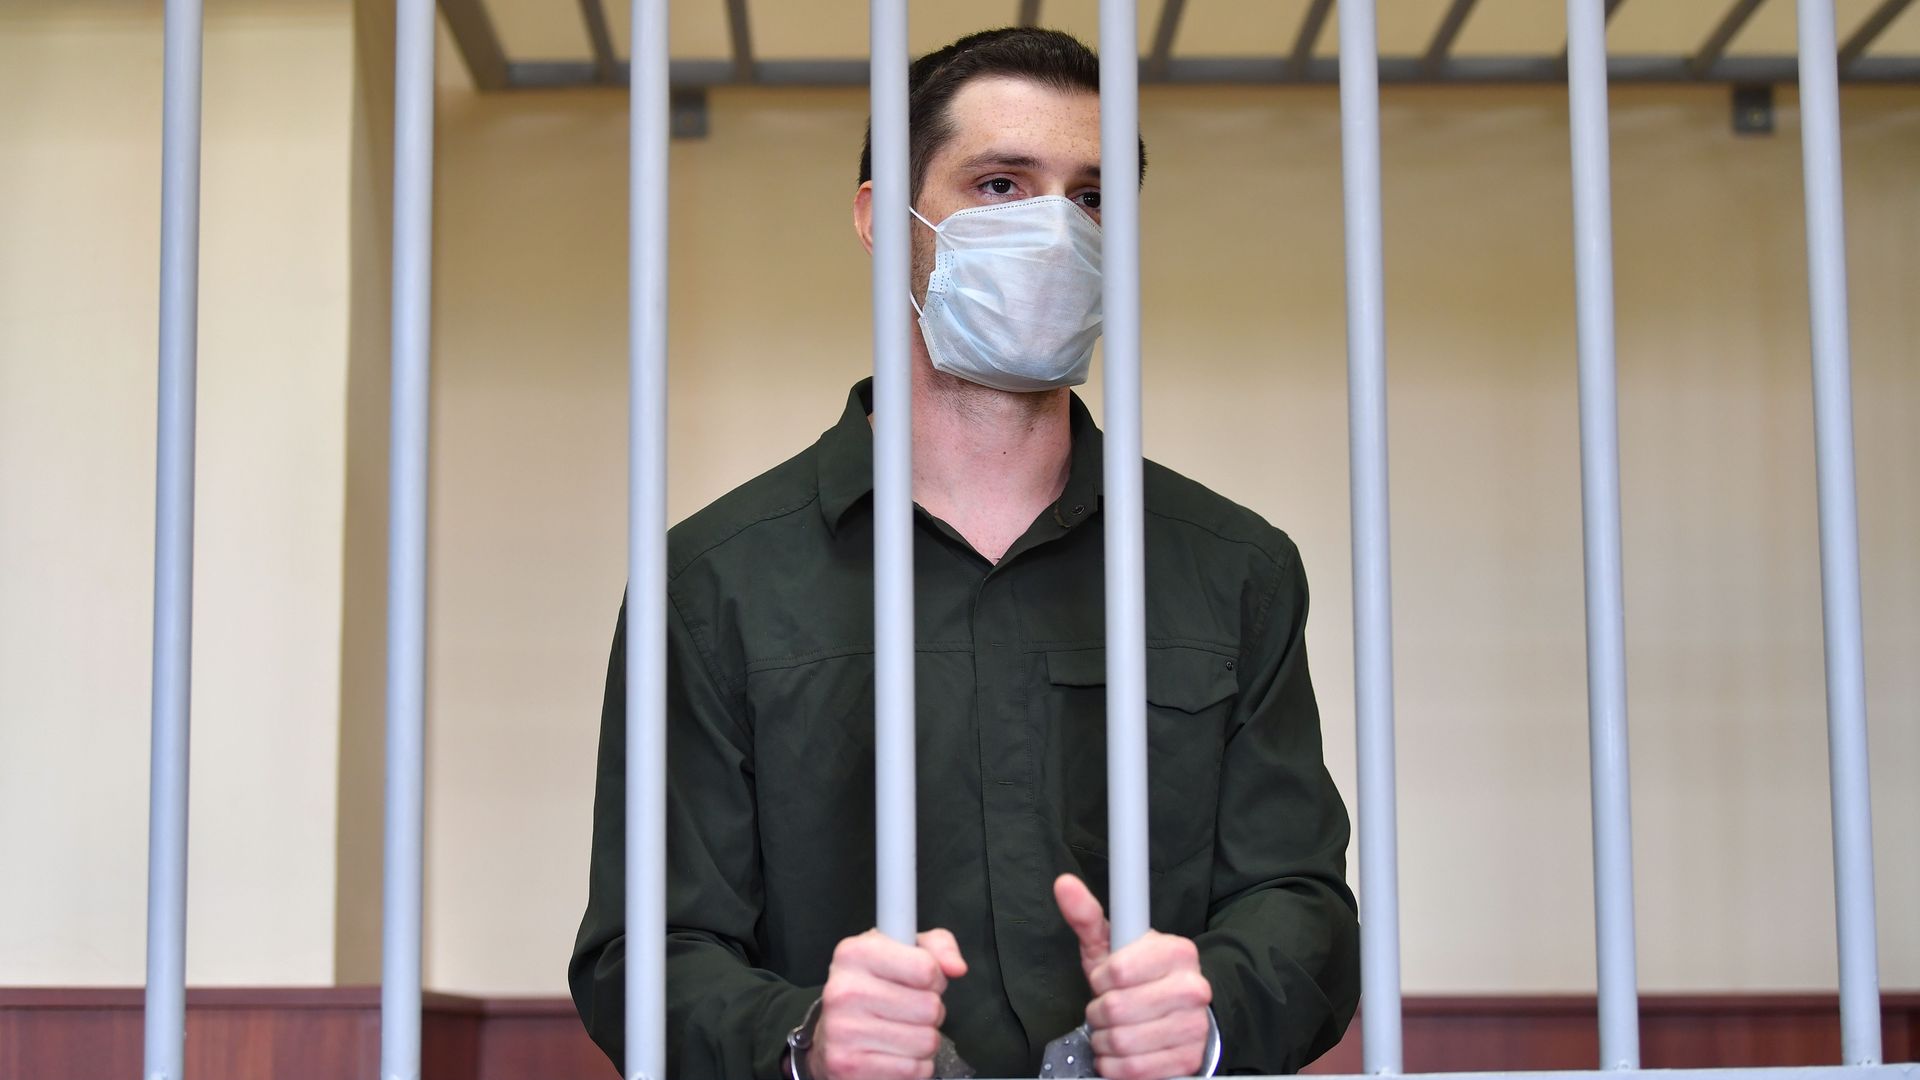 Former U.S. Marine Trevor Reed in a defendants' cage in a Moscow court in July 2020.